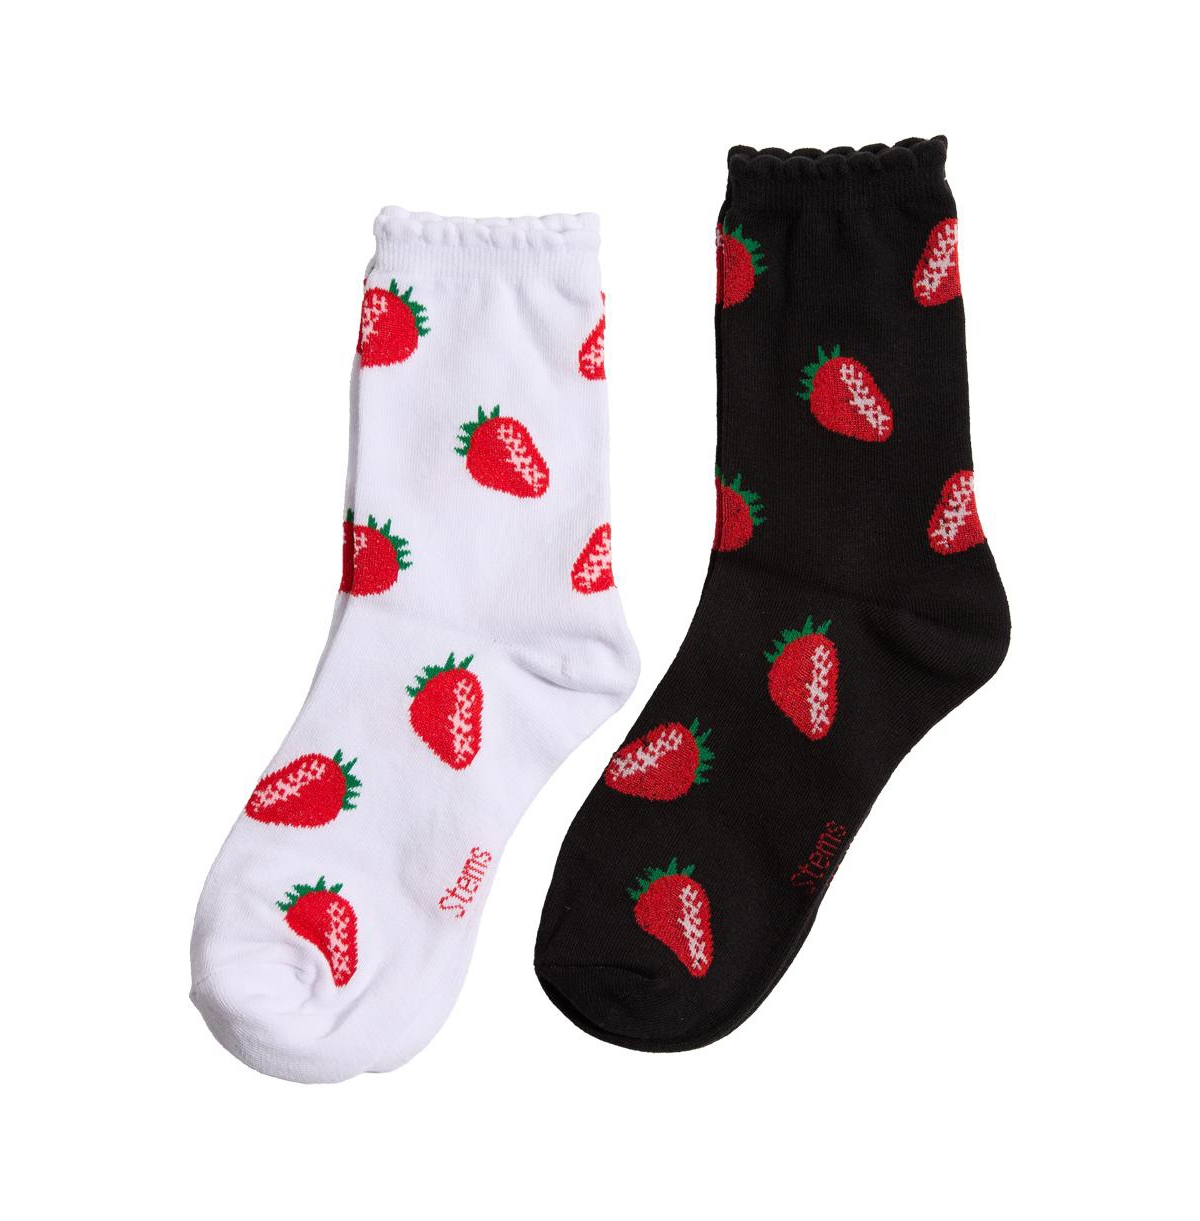 Women's Two Pack of Strawberry Crew Socks - Red